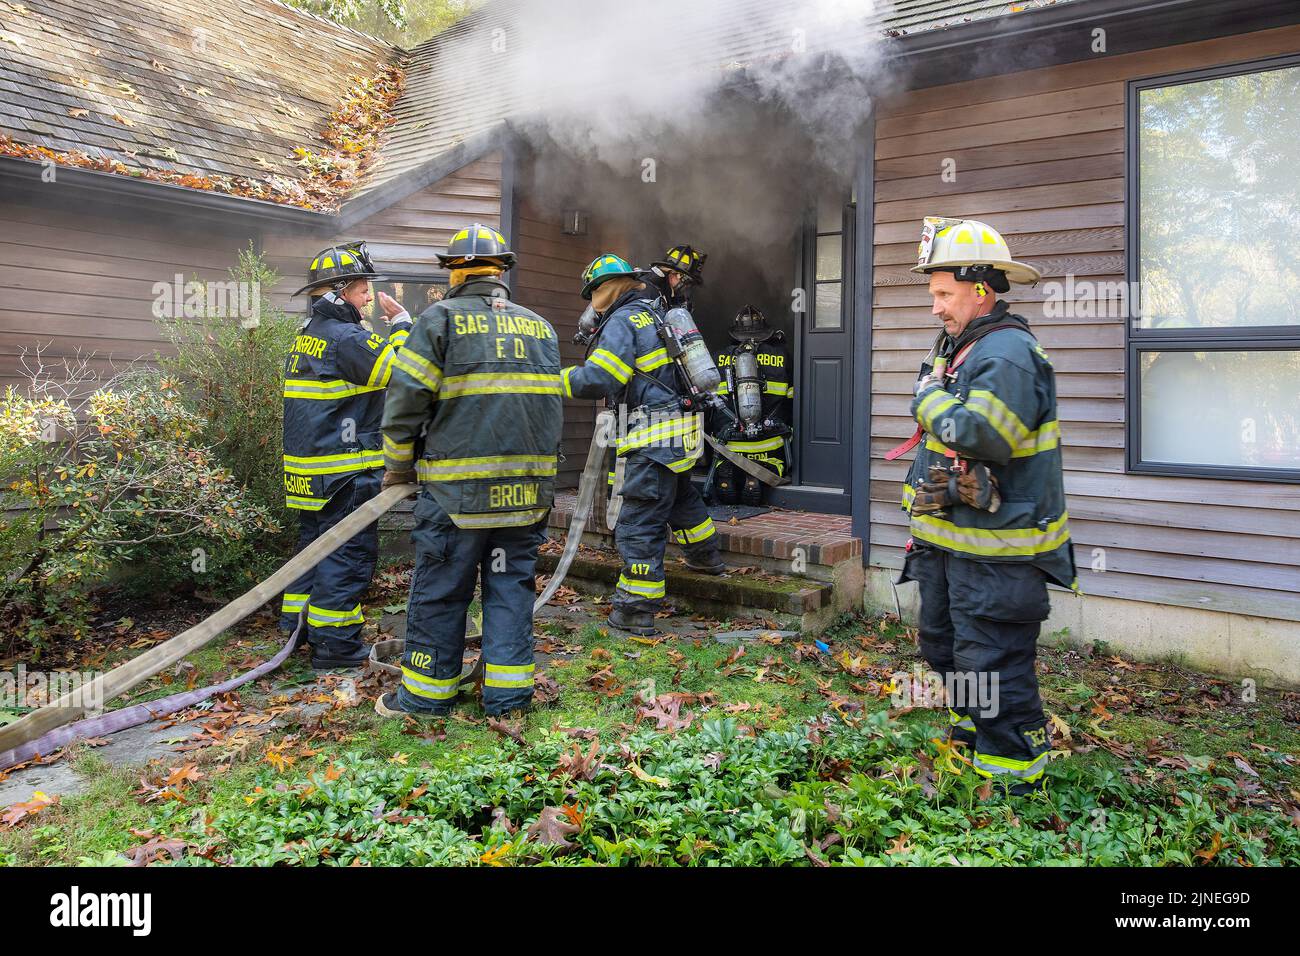 Chief Steve Miller issues commands on his radio as a hose team enters the front door of the building to begin their initial attack as Sag Harbor Fire Stock Photo